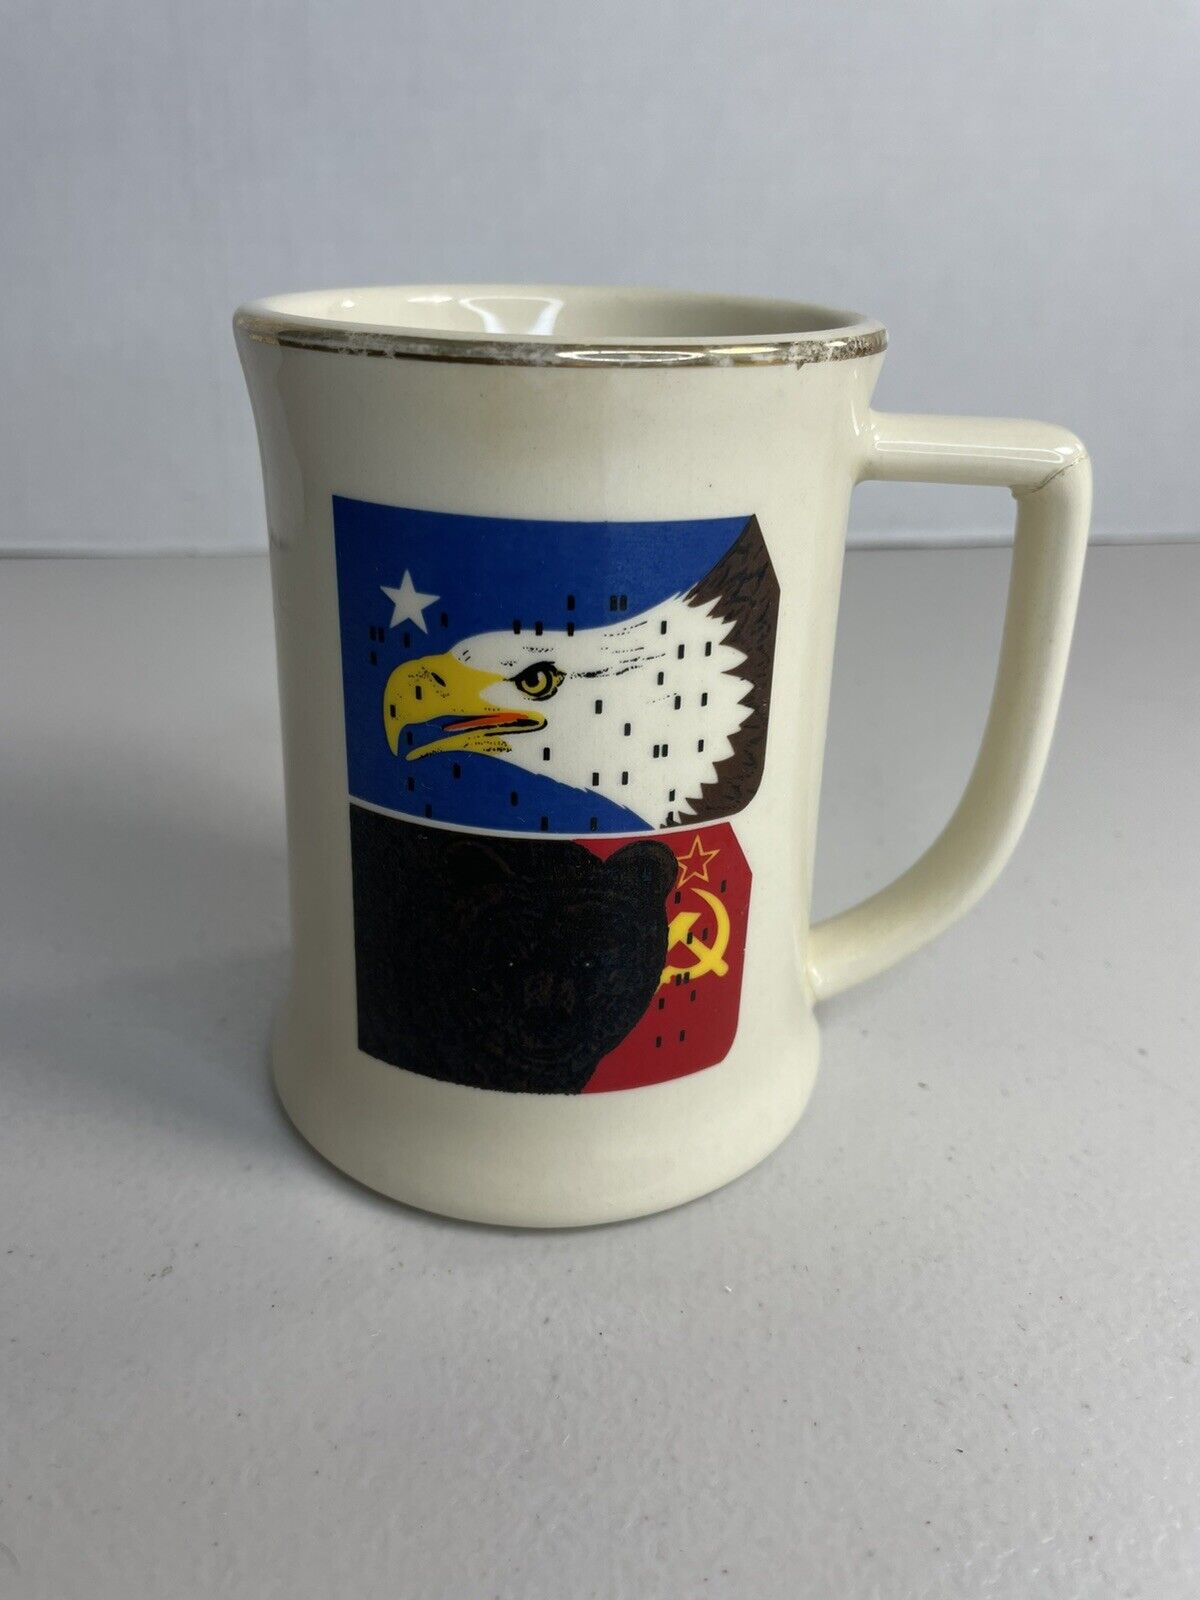 Vintage Cold War/Pc Computers/War Games Coffee Mug. (Has Been Repaired)